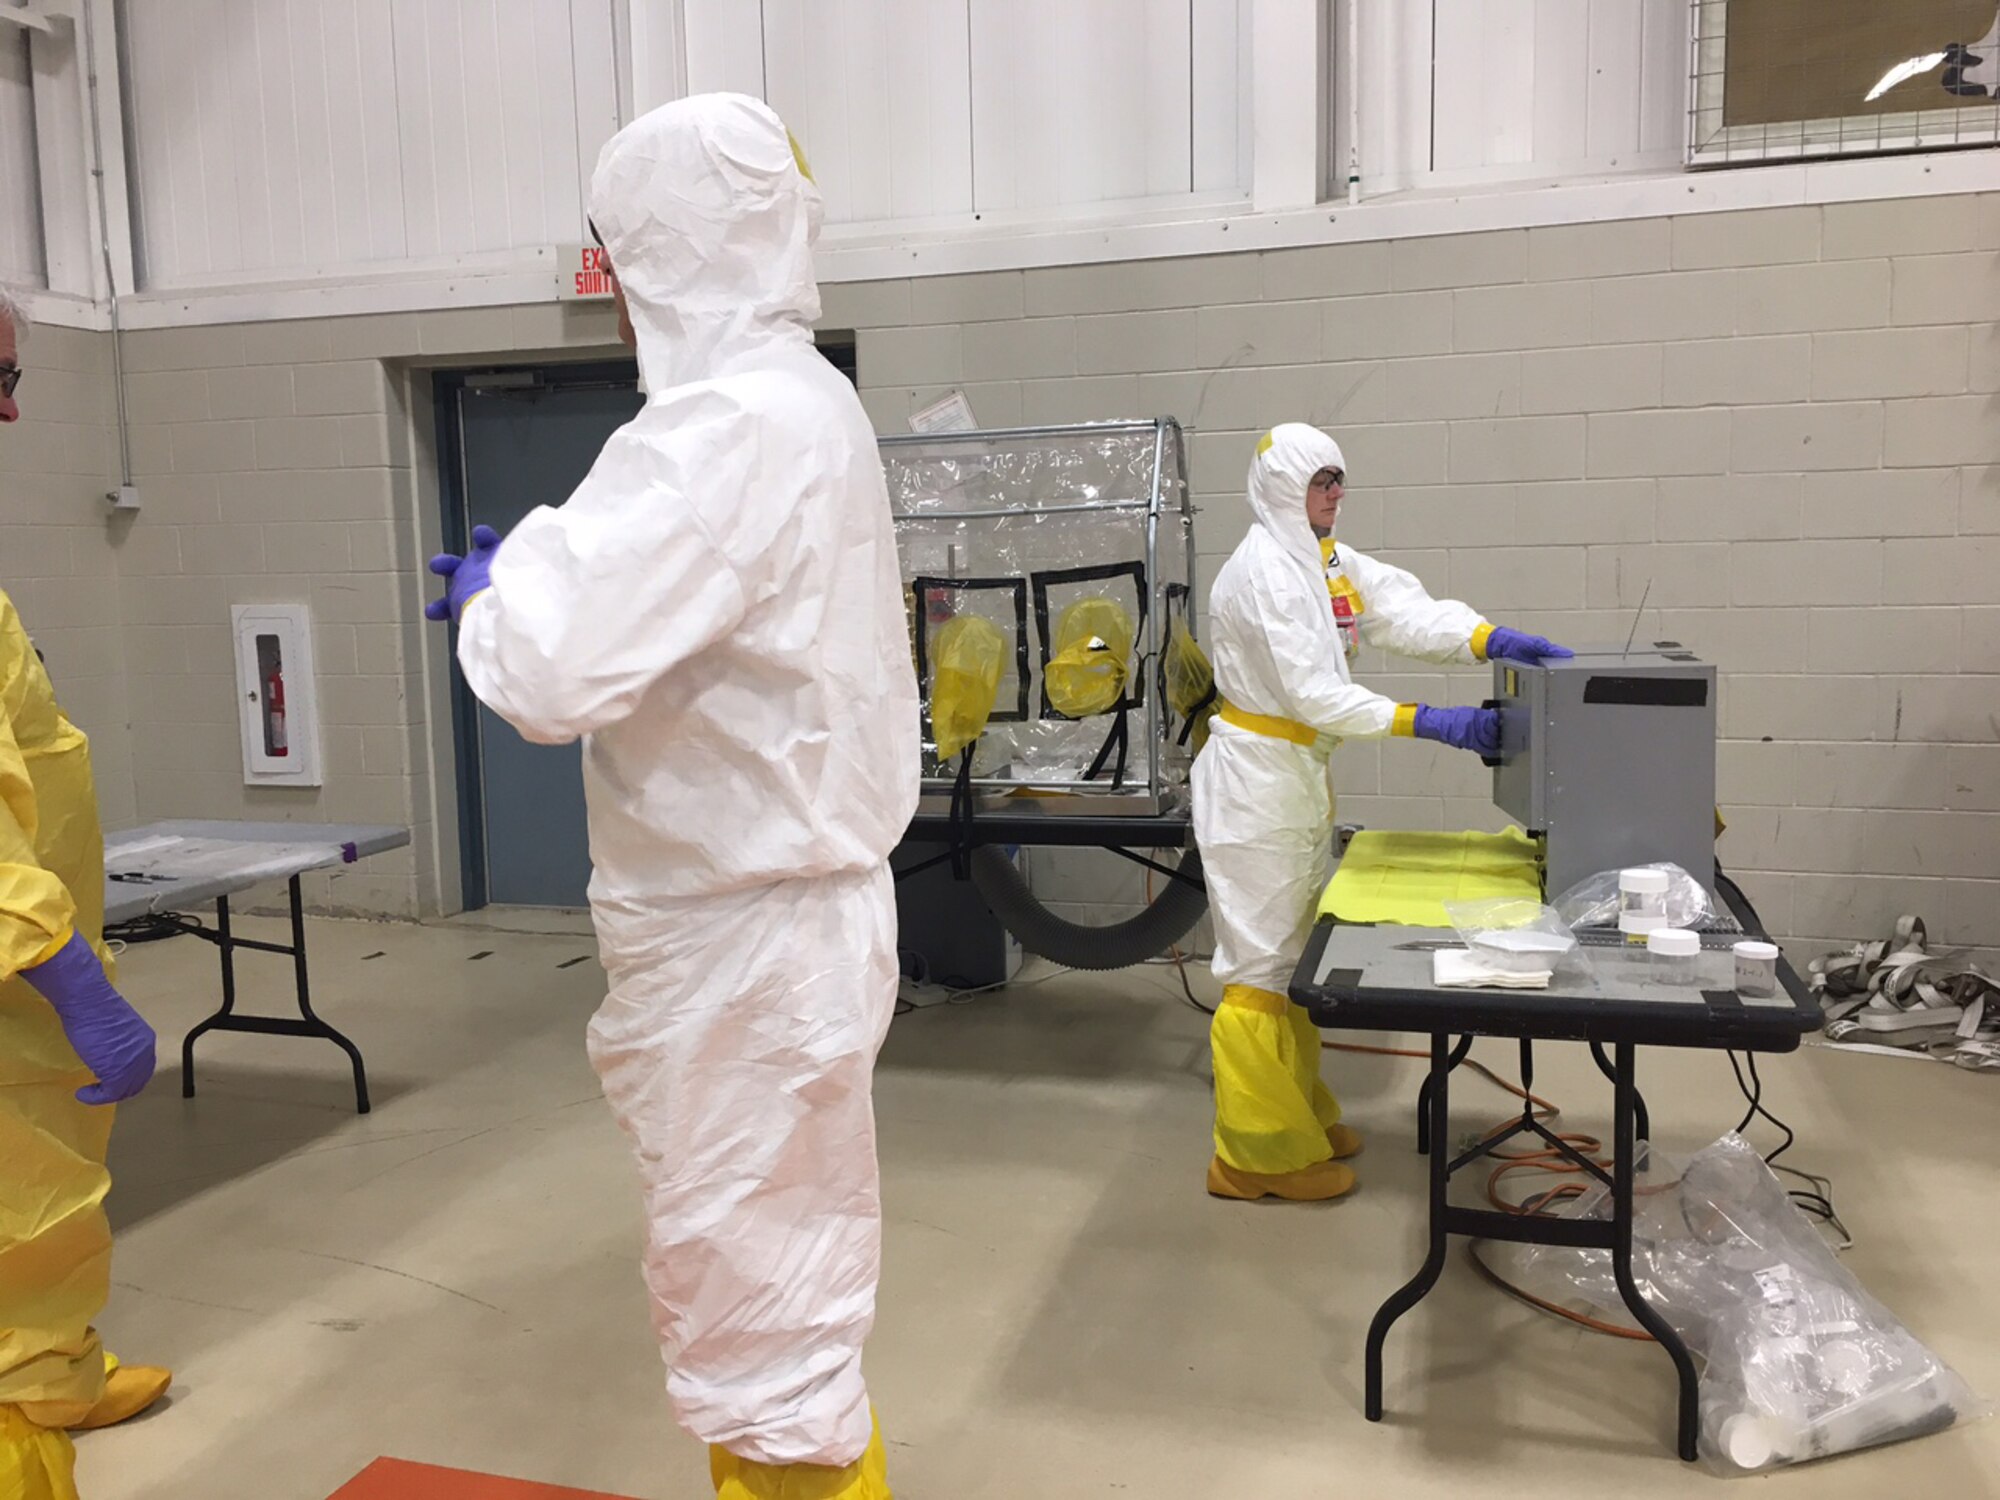 Technicians prepare simulated nuclear debris samples collected during Prominent Hunt 17-1, a combined counterterrorism exercise between the United States and Canada April 24-28, 2017.  The exercise collectively tested each nation’s ability to respond to two simulated nuclear post-detonation attacks..  (Photo courtesy of the Department of Homeland Security)